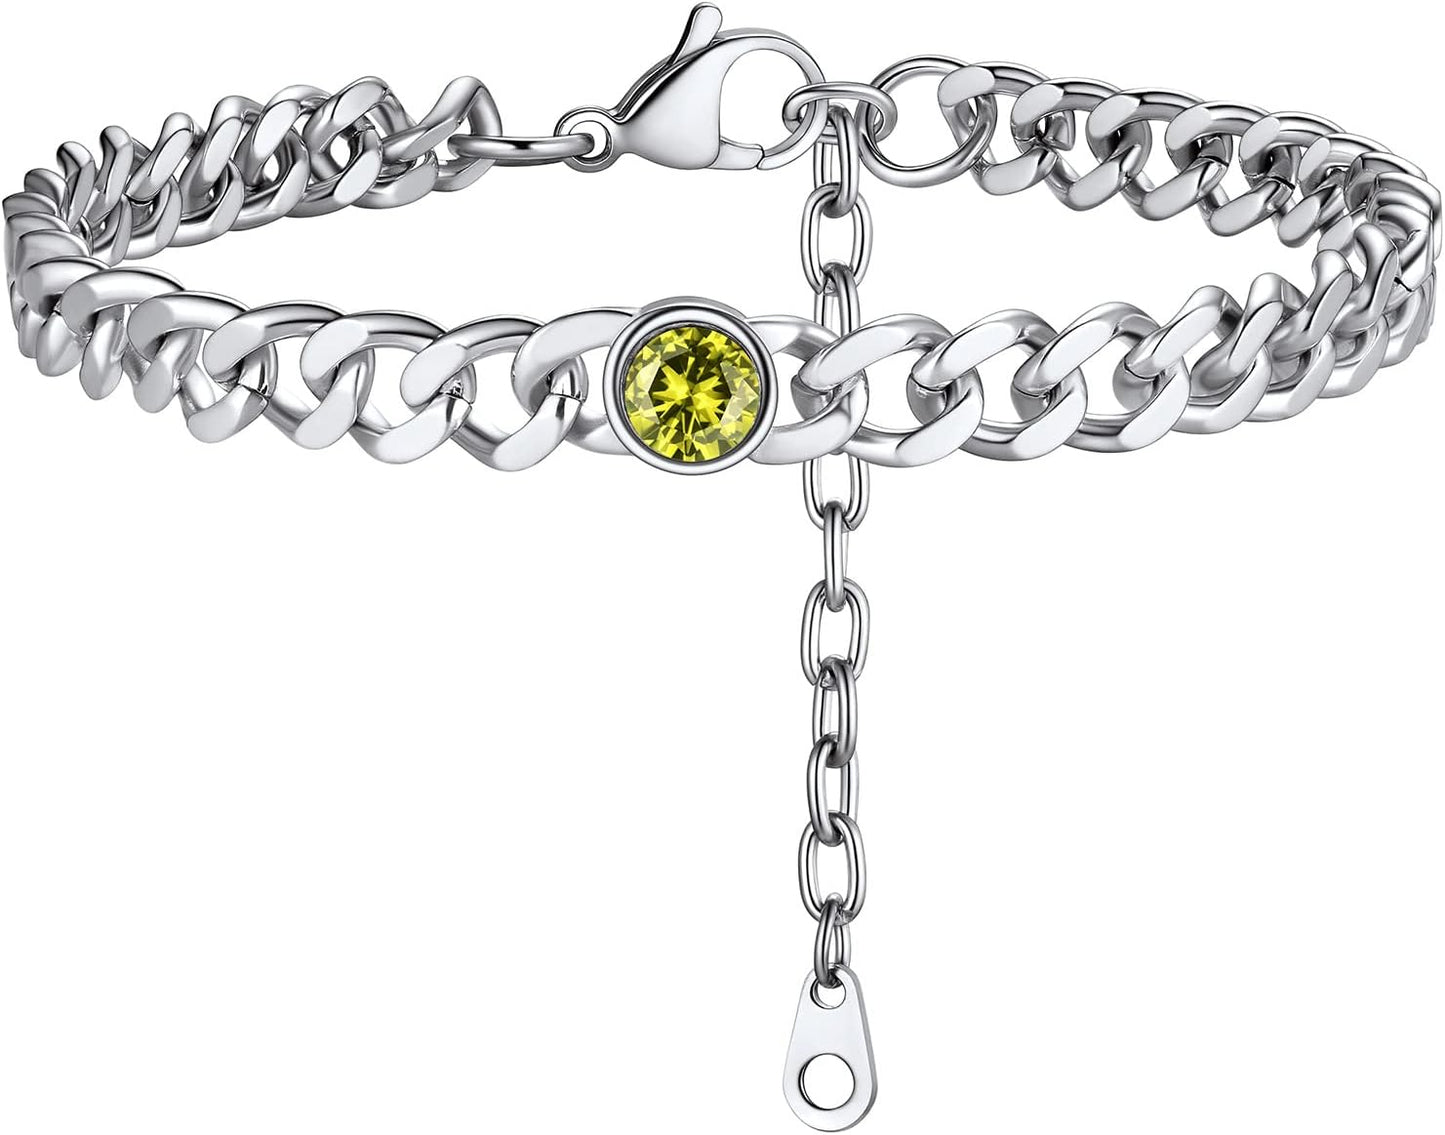 PROSTEEL Birthstone Cuban Links Chain Jan - Dec 12 Months Black/18K Gold Plated Stainless Steel Anklets